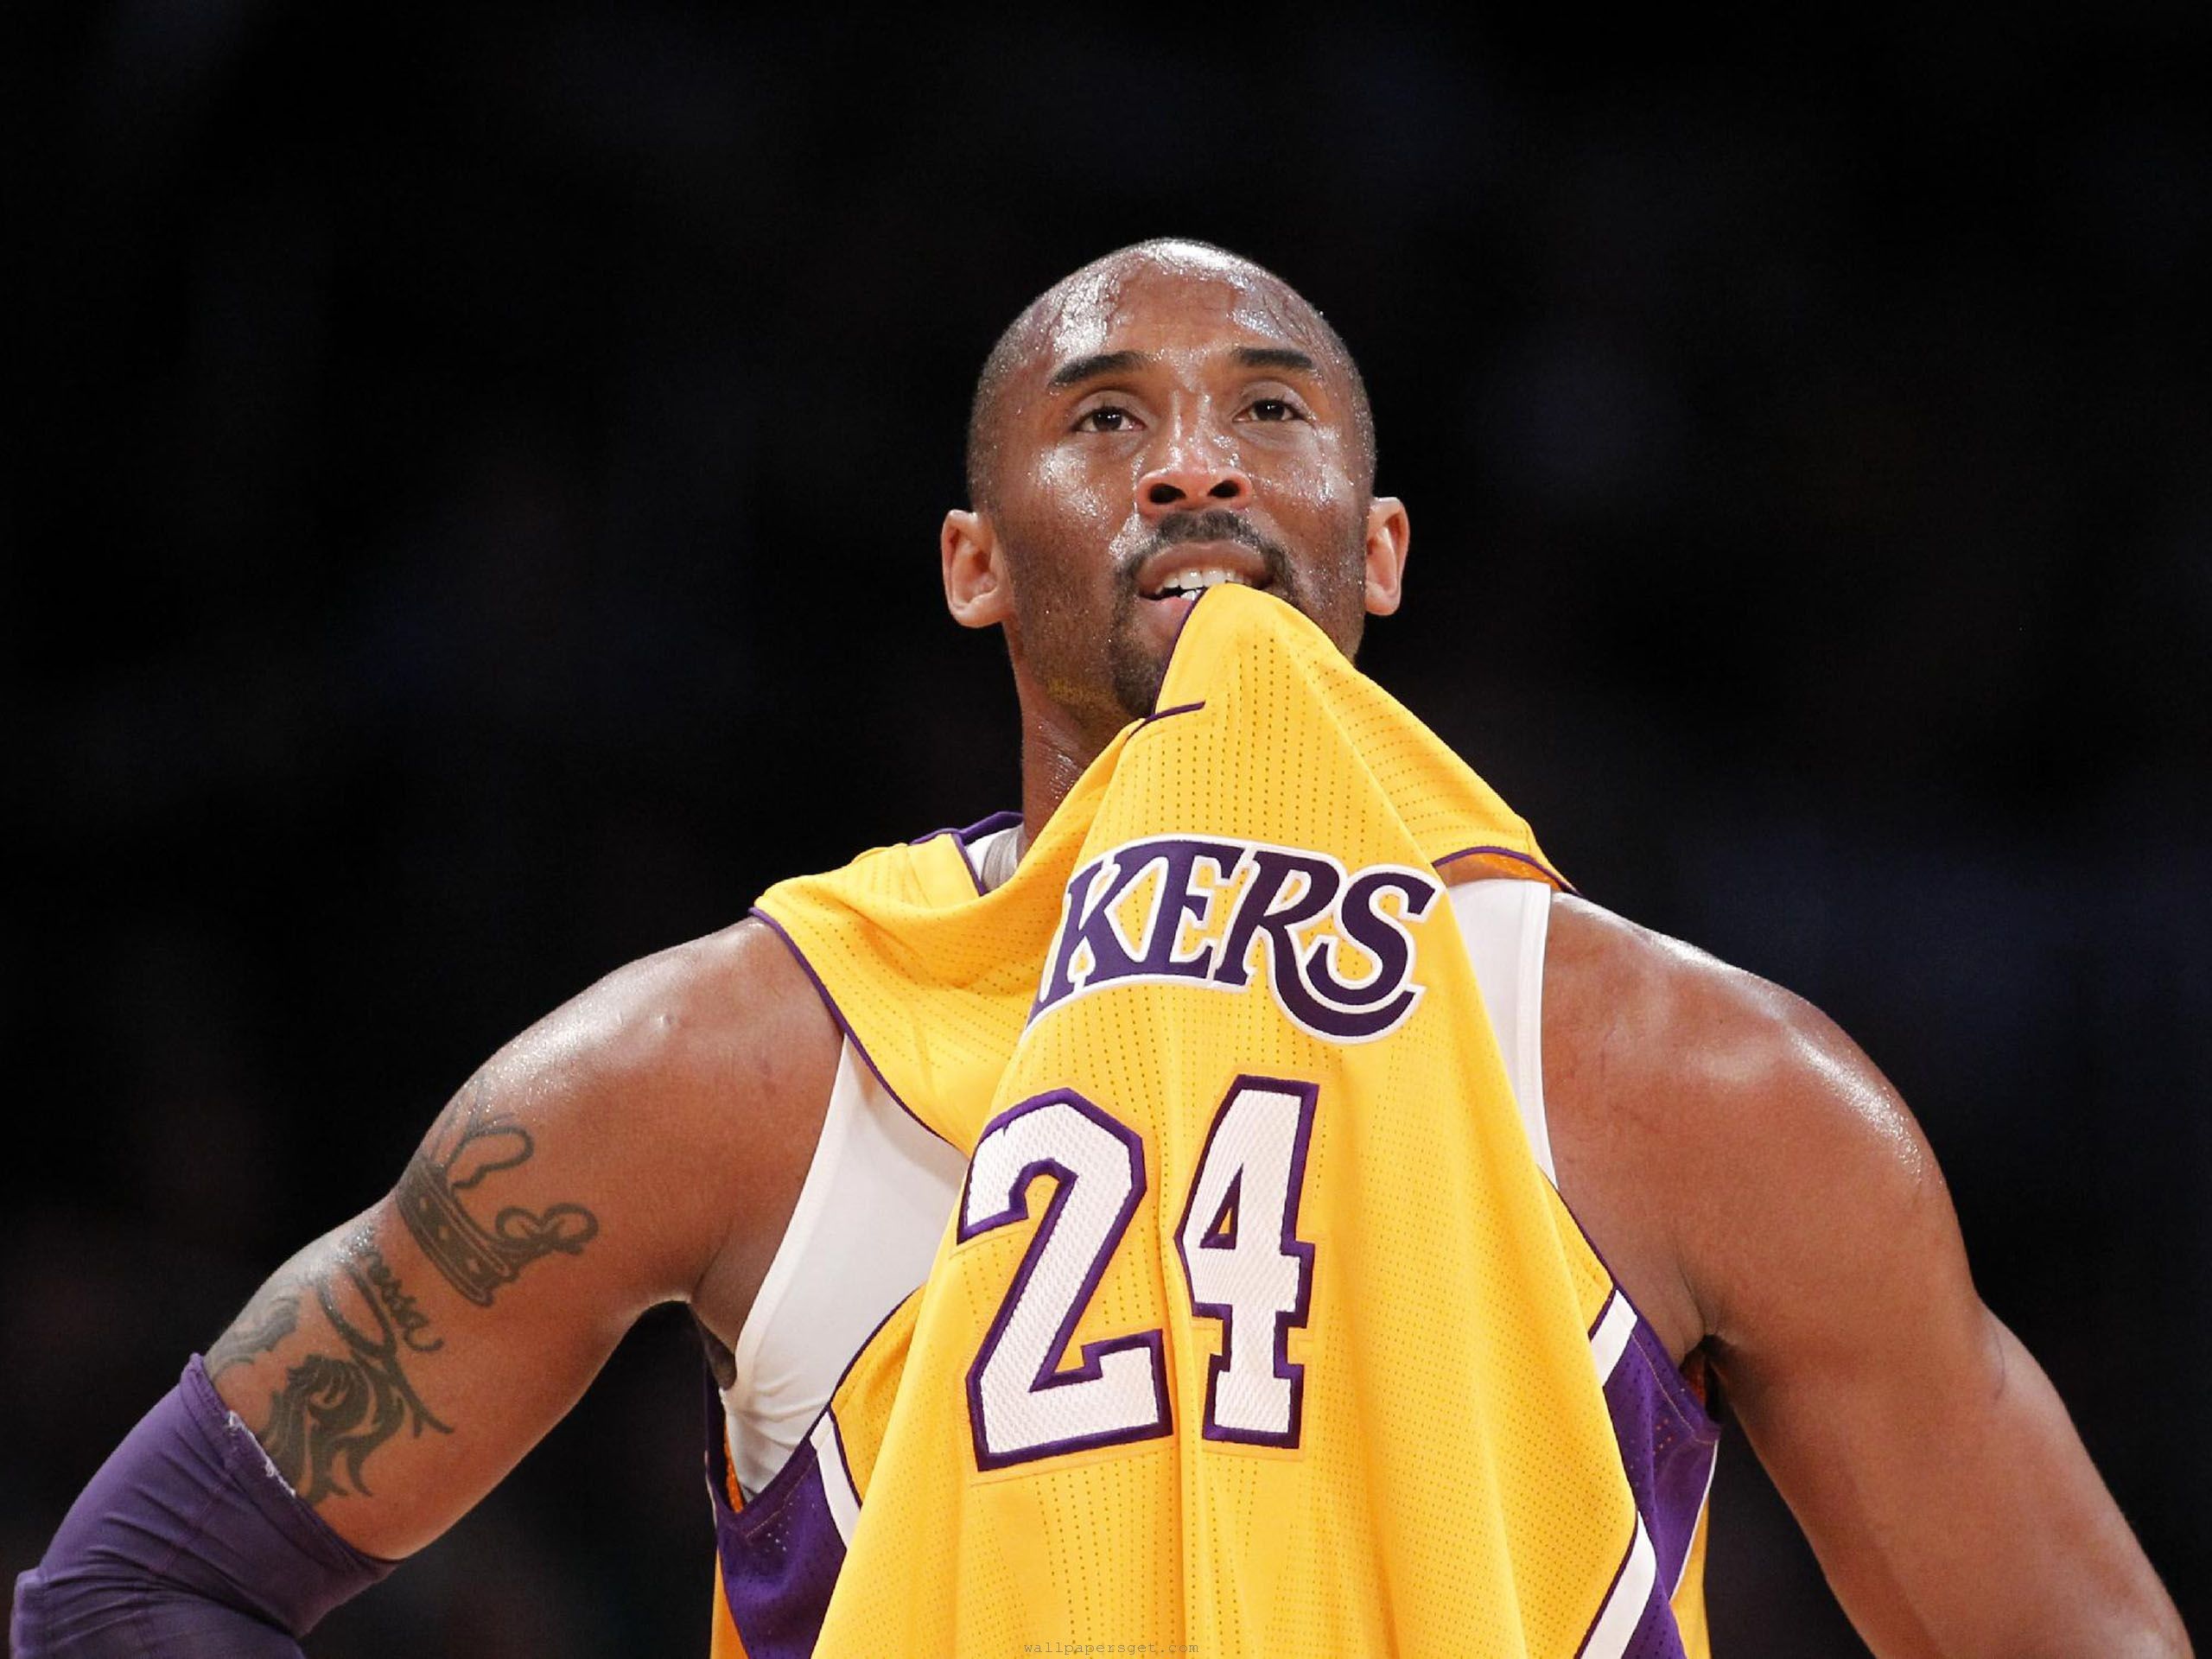 Free download Download Kobe Bryant Wallpaper picture in high